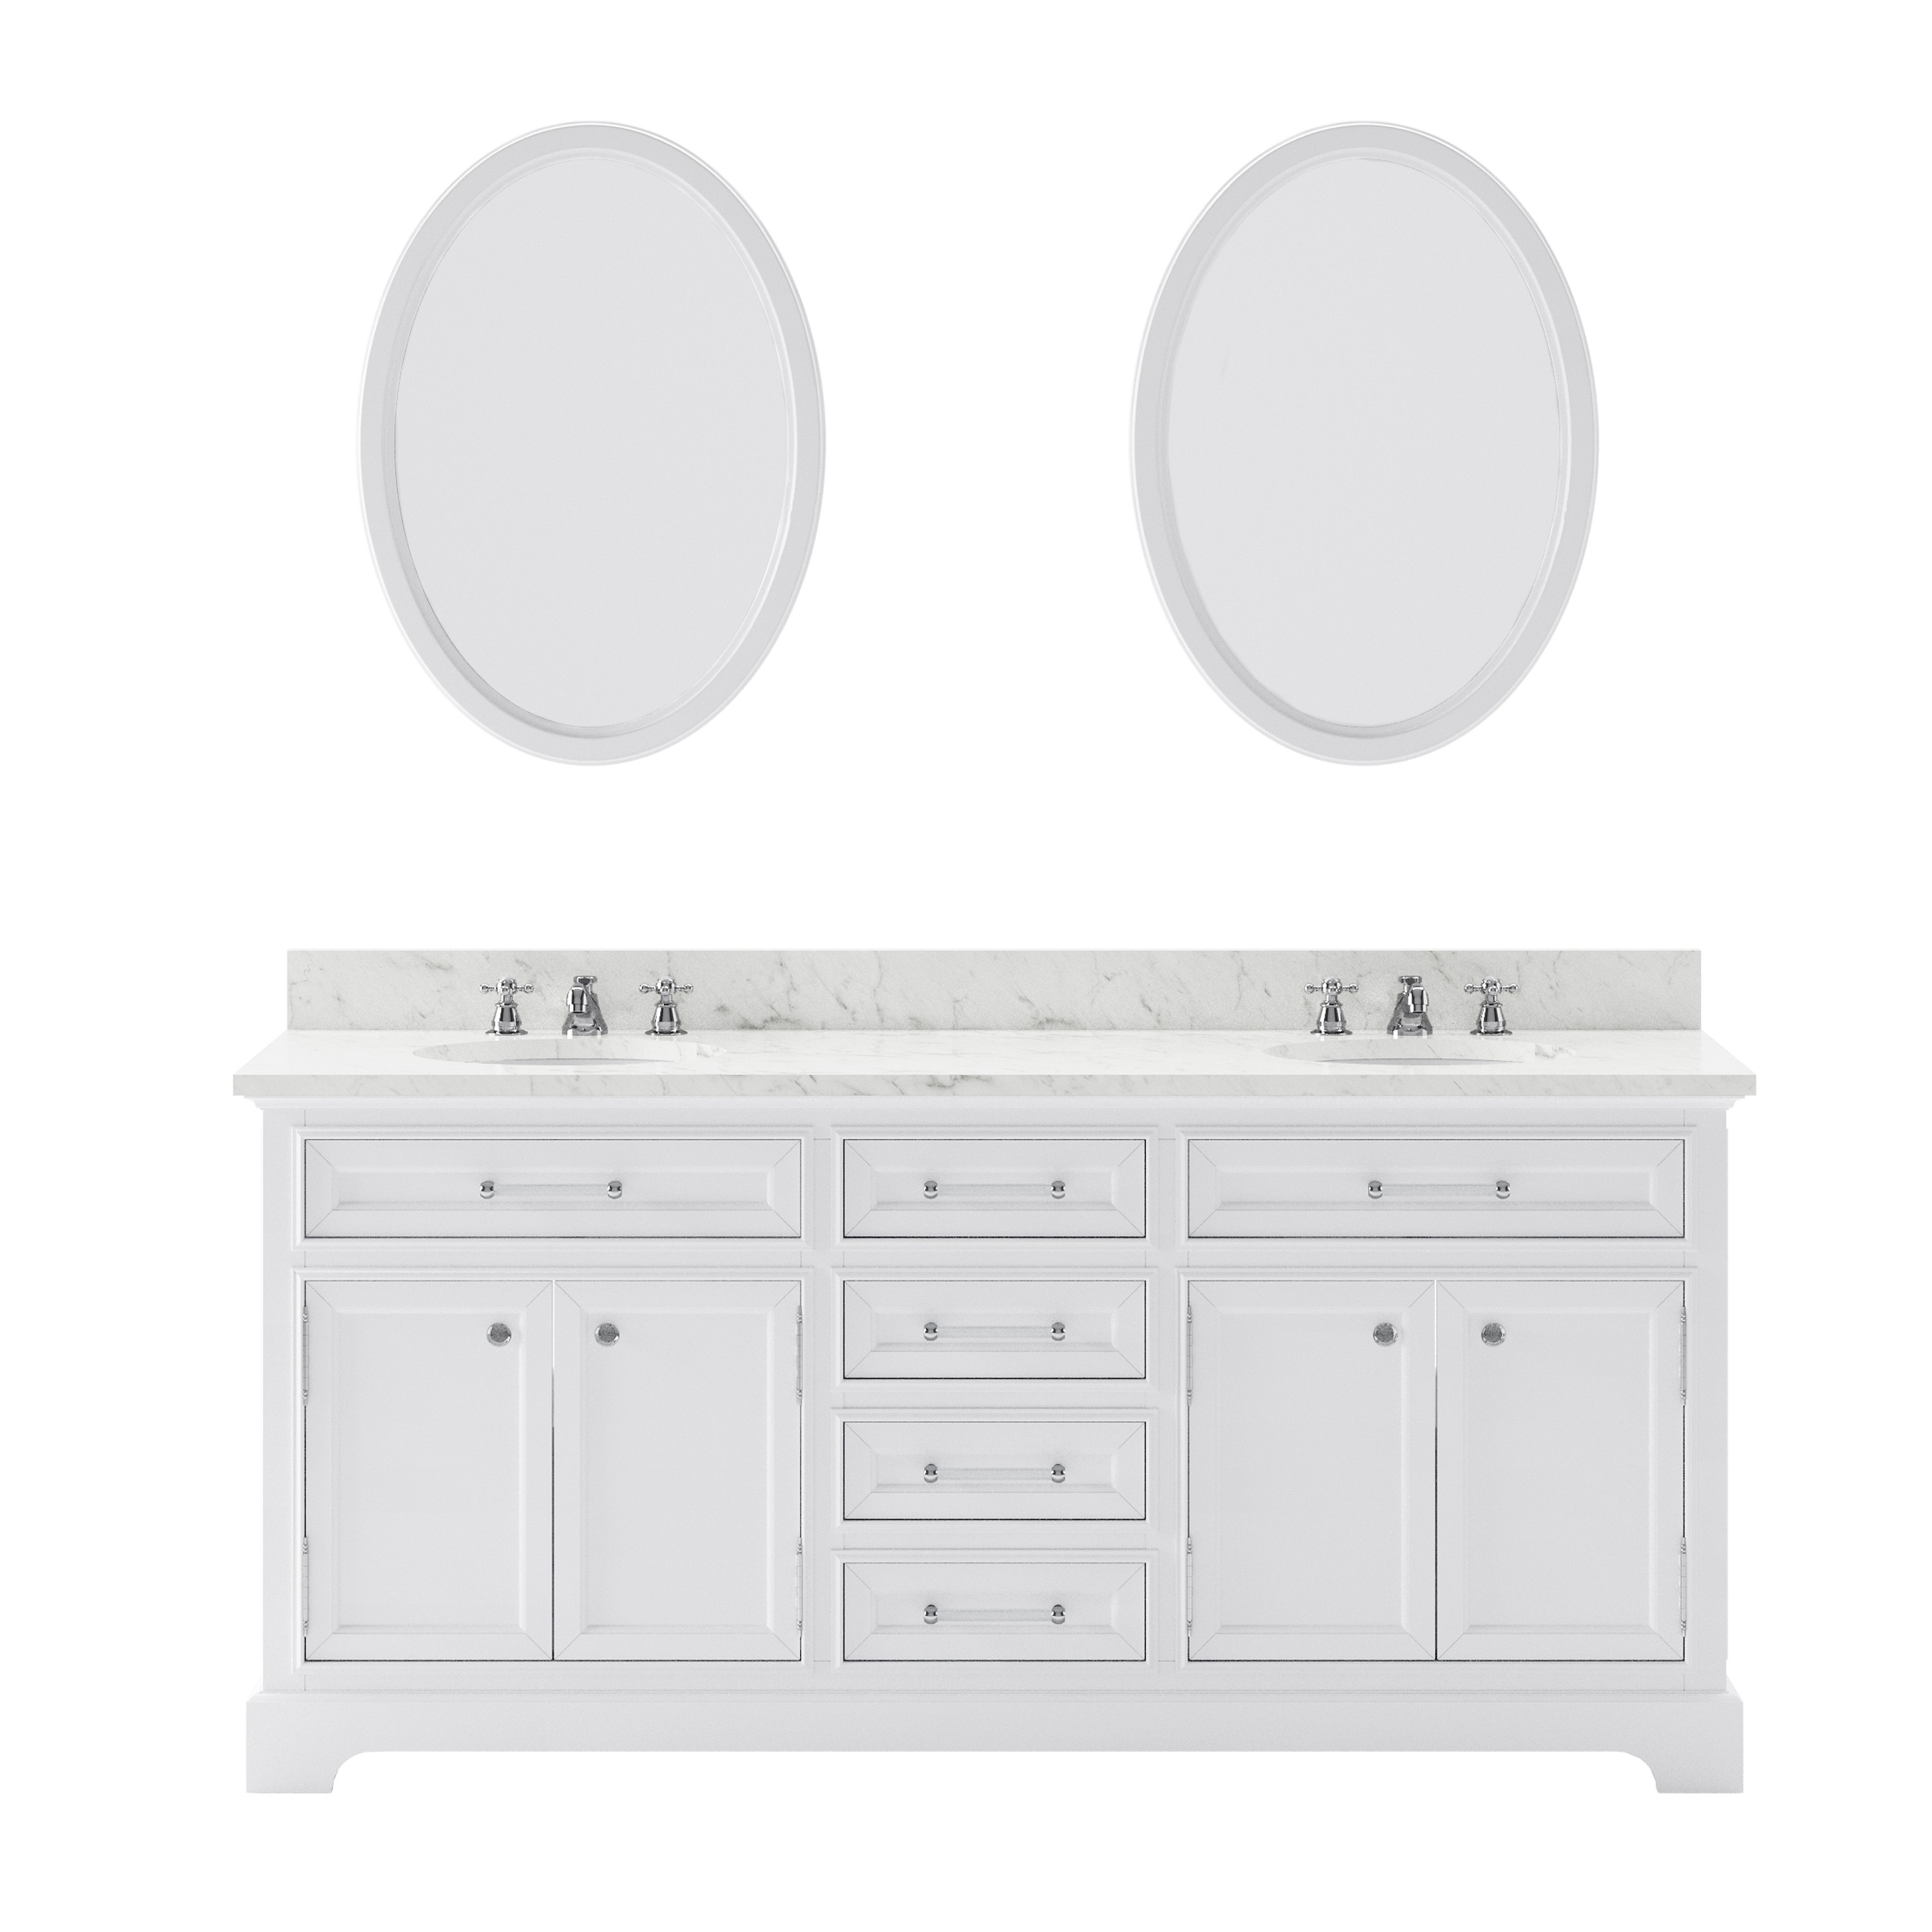 WATER-CREATION DE72CW01PW-O24BX0901 DERBY 72 INCH PURE WHITE DOUBLE SINK BATHROOM VANITY WITH 2 MATCHING FRAMED MIRRORS AND FAUCETS